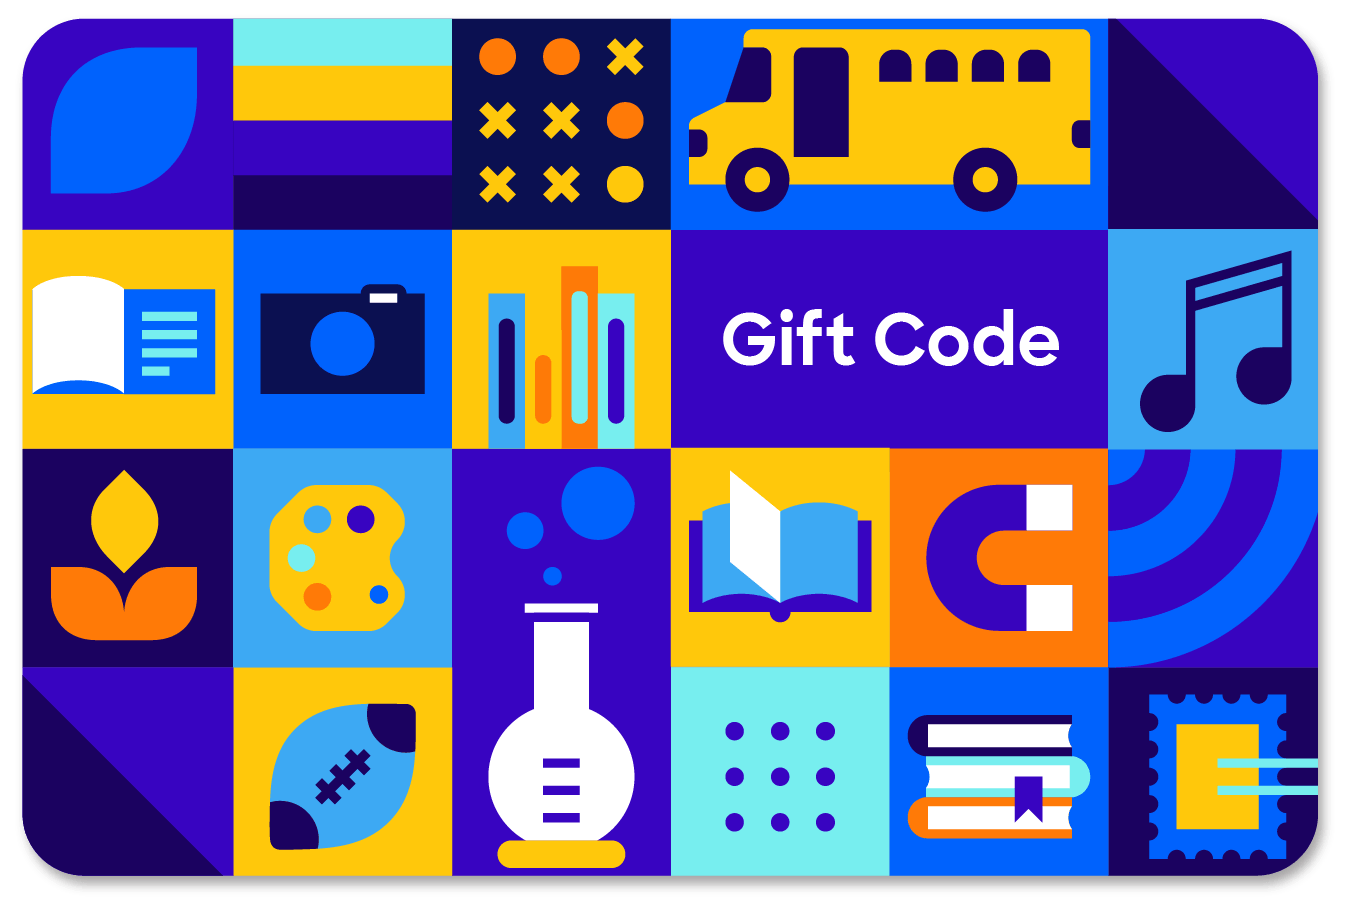 How to get into the world of gift cards?